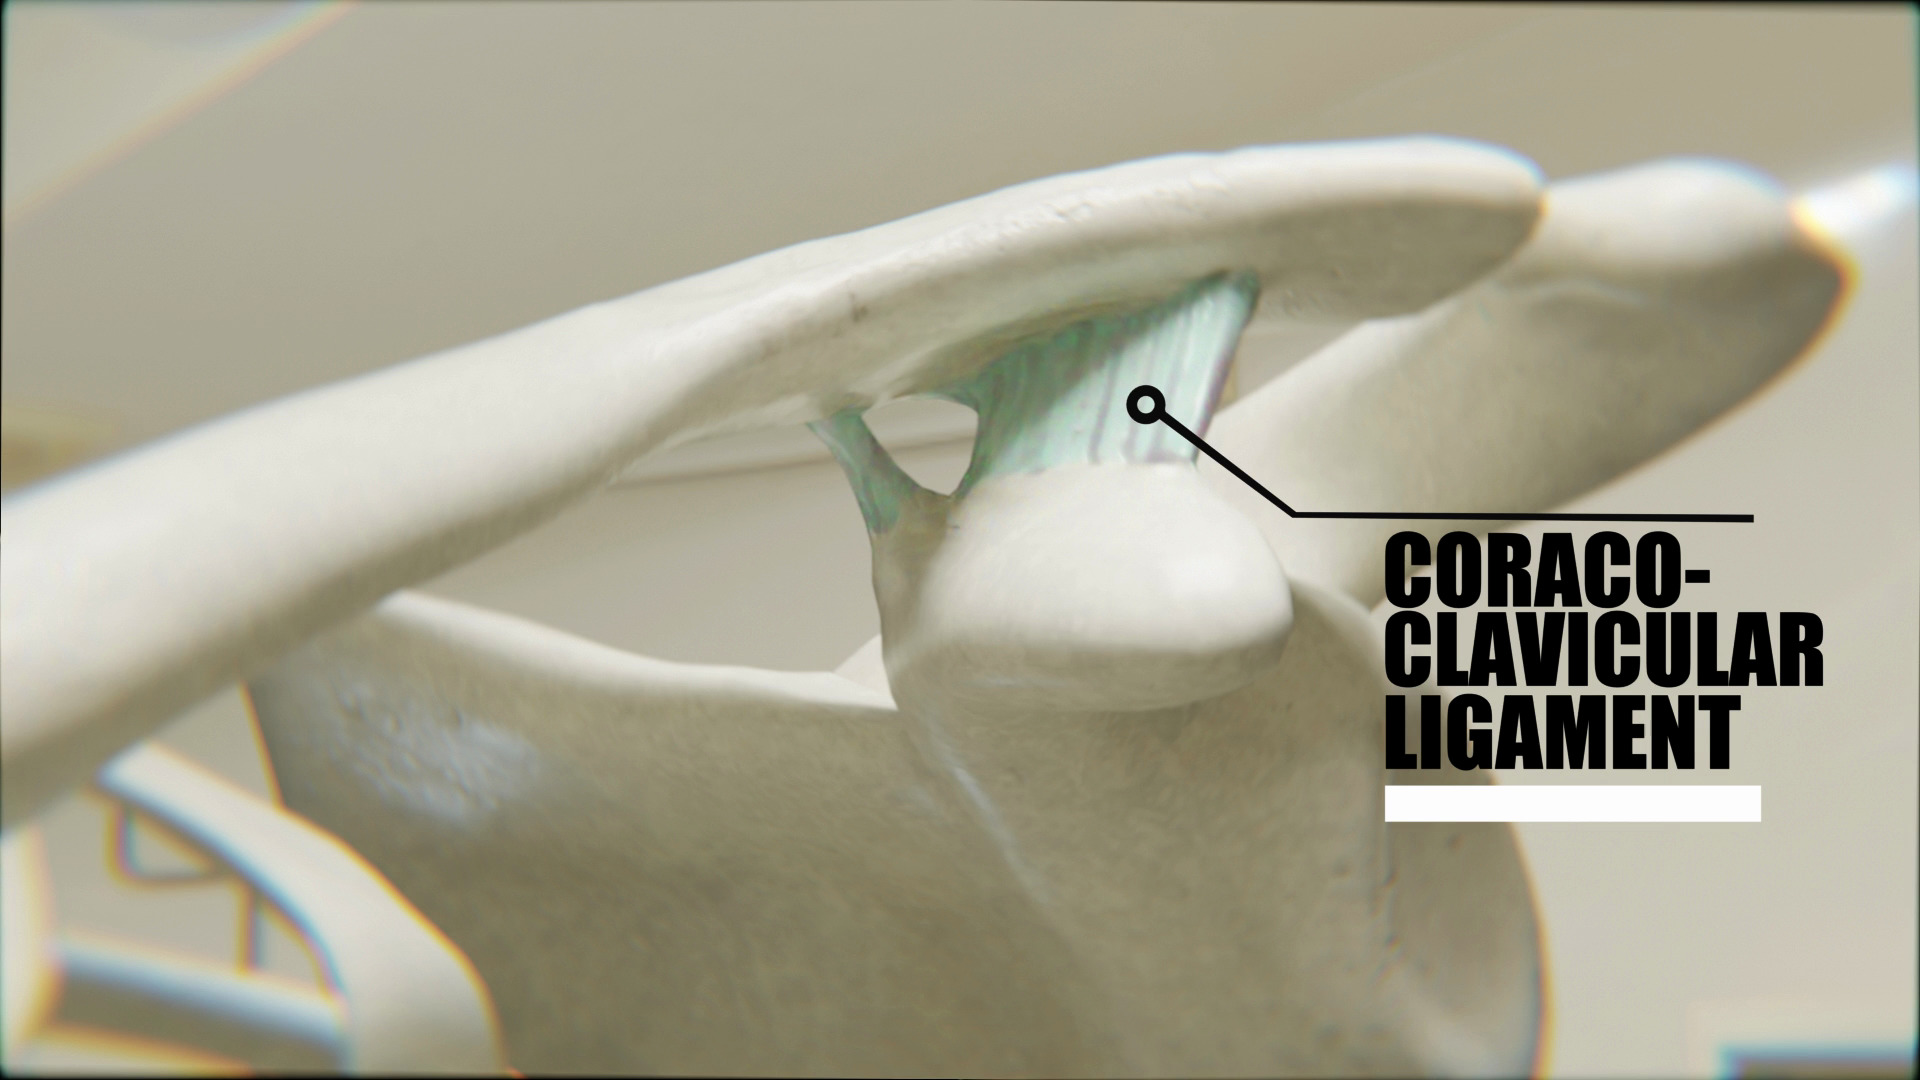 Coraco Clavicular Ligament